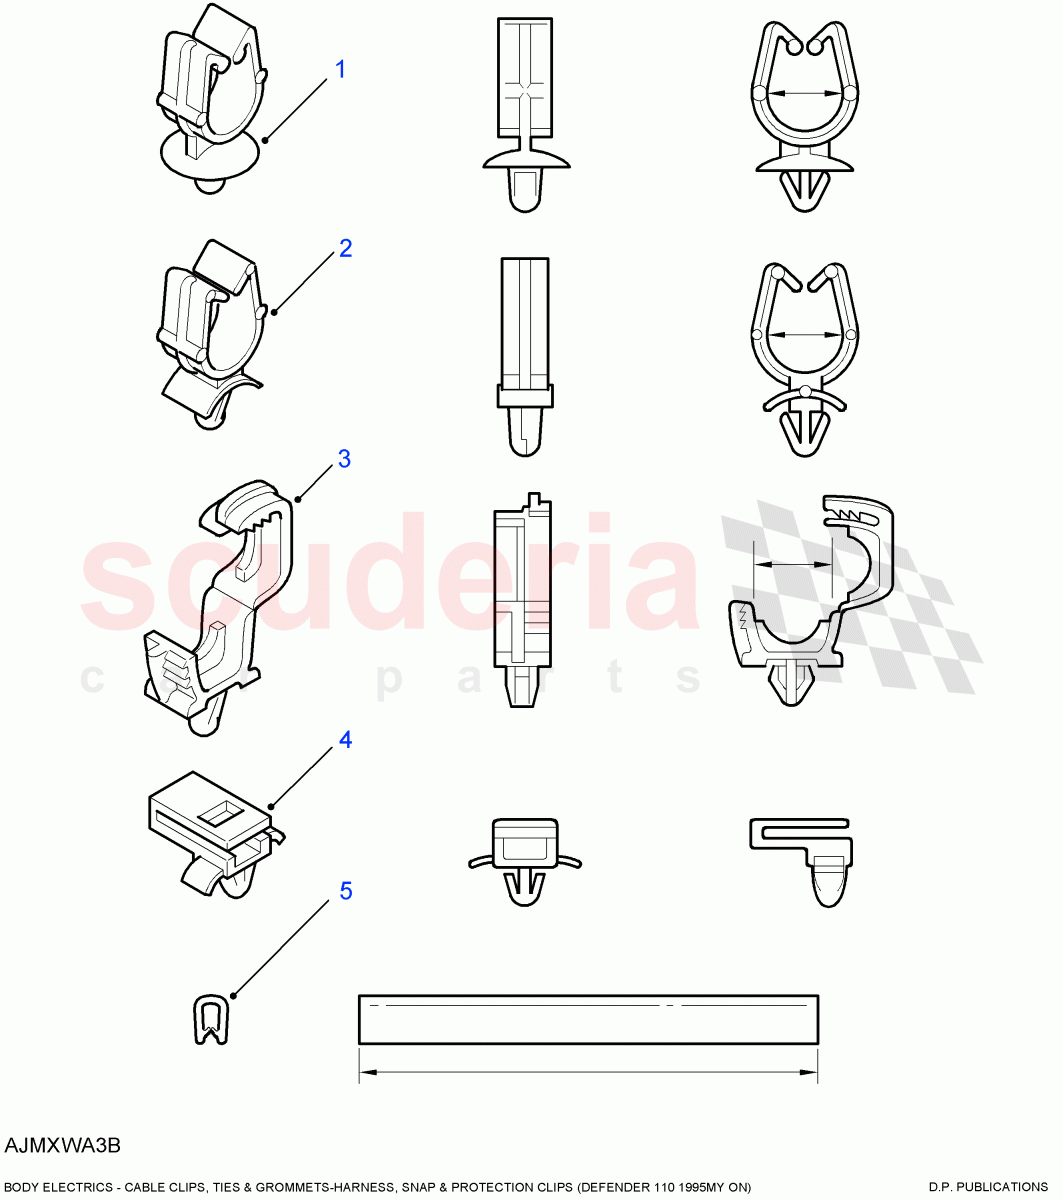 Harness, Snap & Protection Clips((V)FROM7A000001) of Land Rover Land Rover Defender (2007-2016)